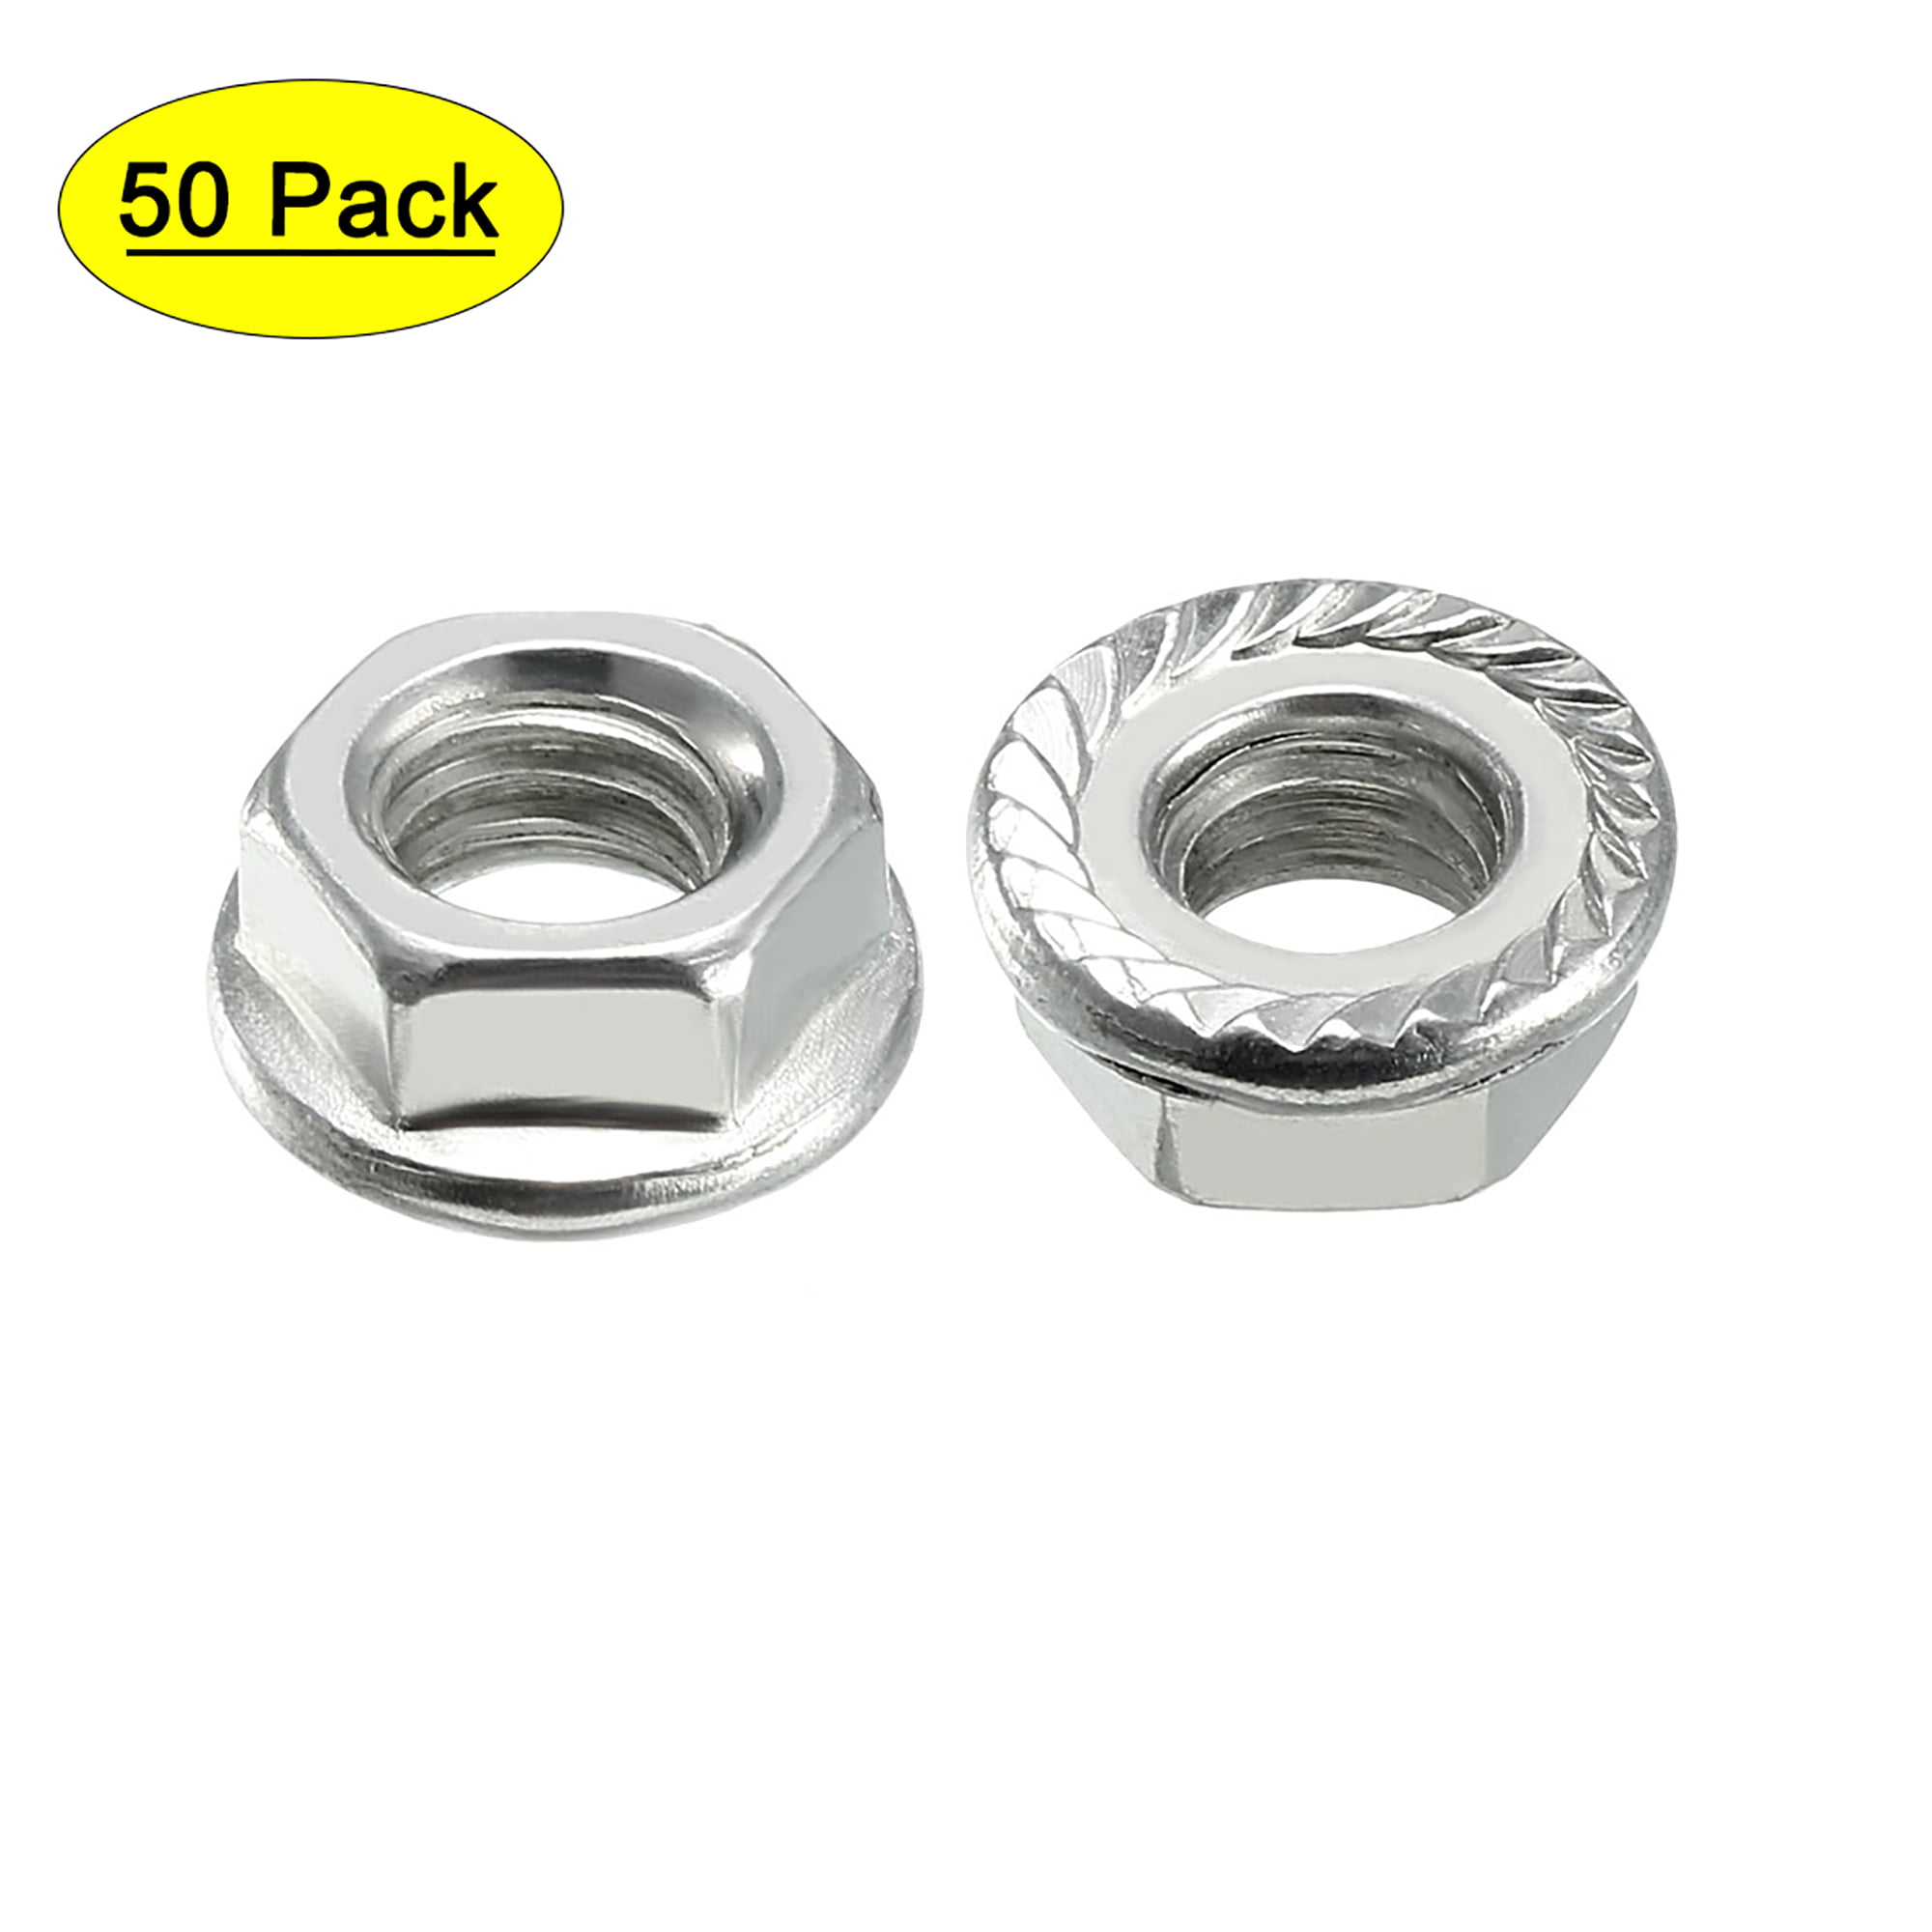 Serrated Flange Lock Nut Nyloc Nuts Metric Hex Head M3-M10 A2 Stainless Steel